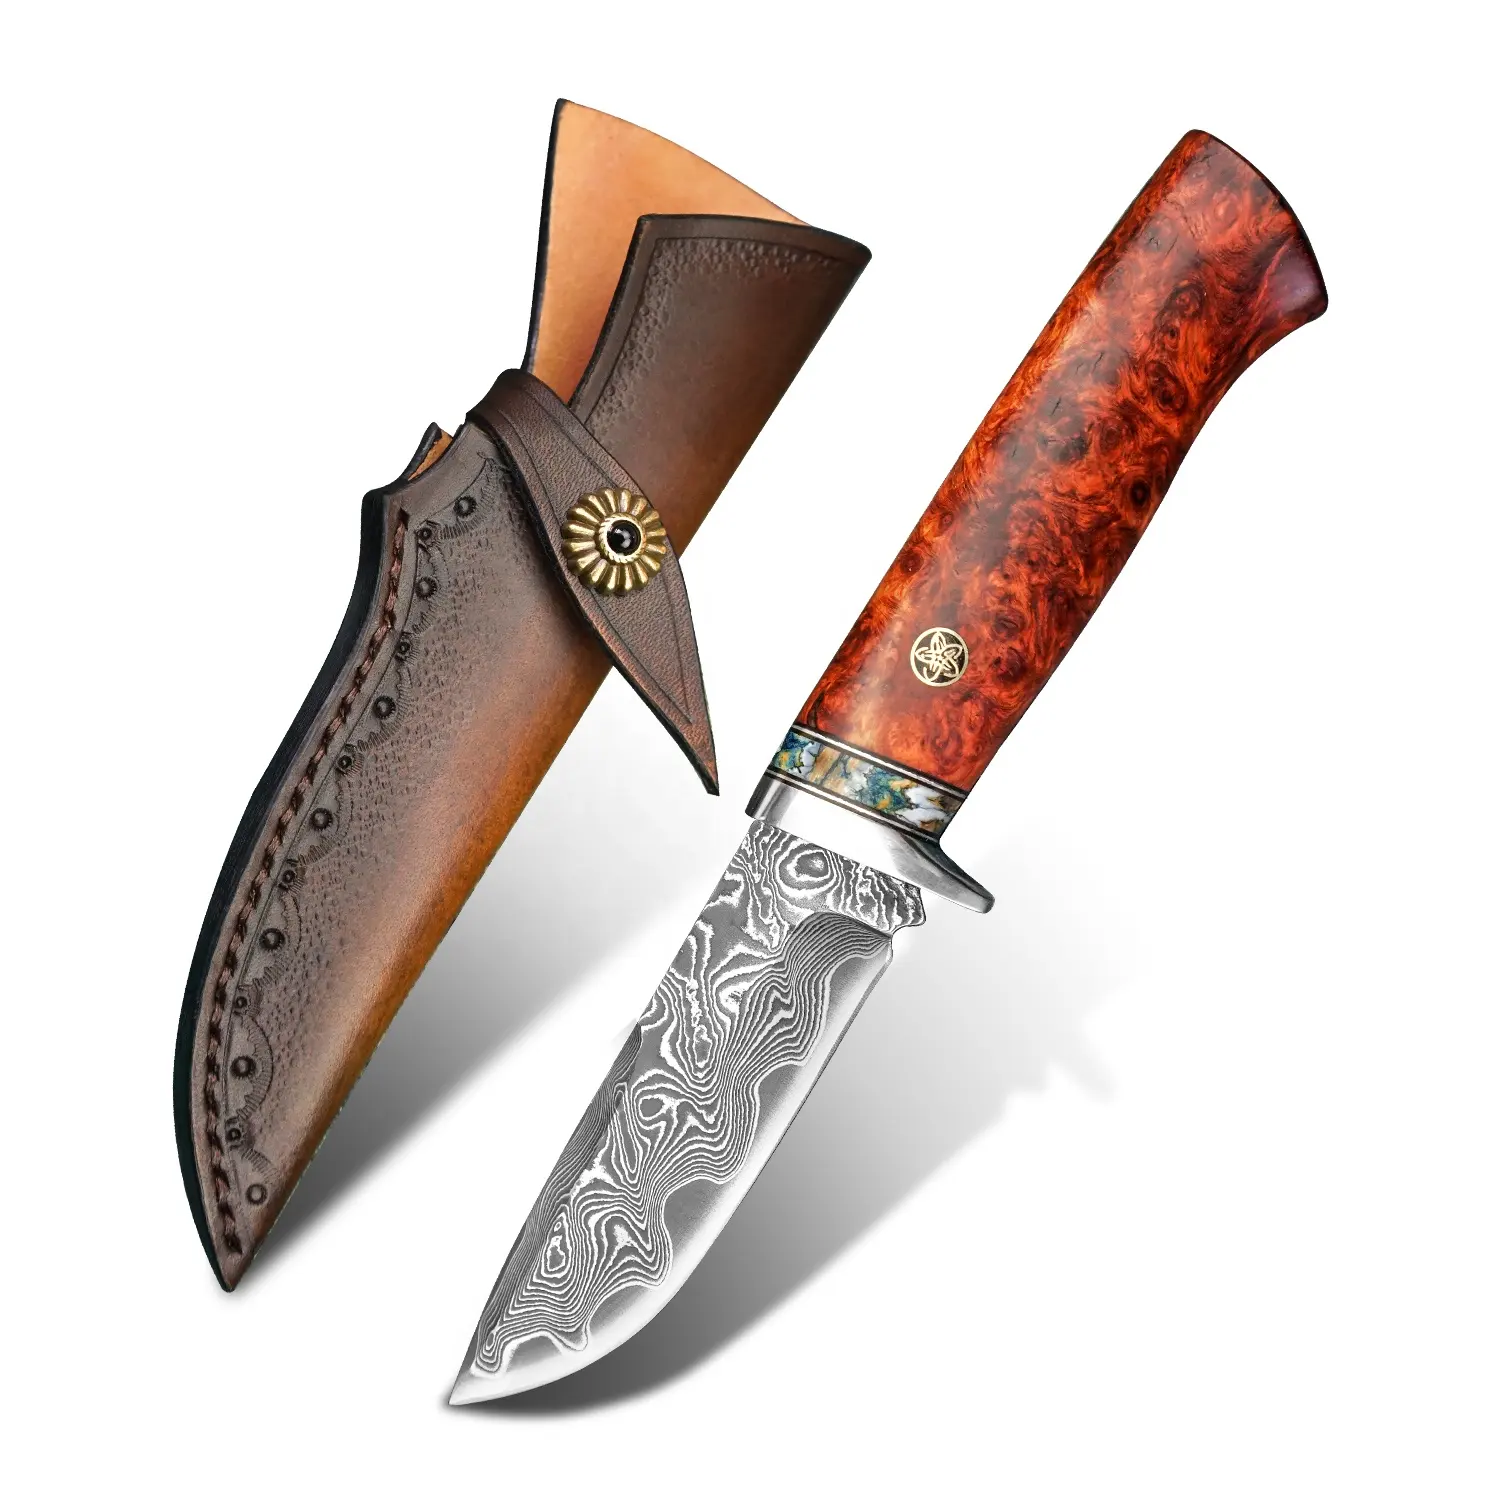 Stabilized Wood Mammoth Fossil Fixed Blade Bowie Knives with Sheath Outdoor Survival Damascus Steel Hunting Knife